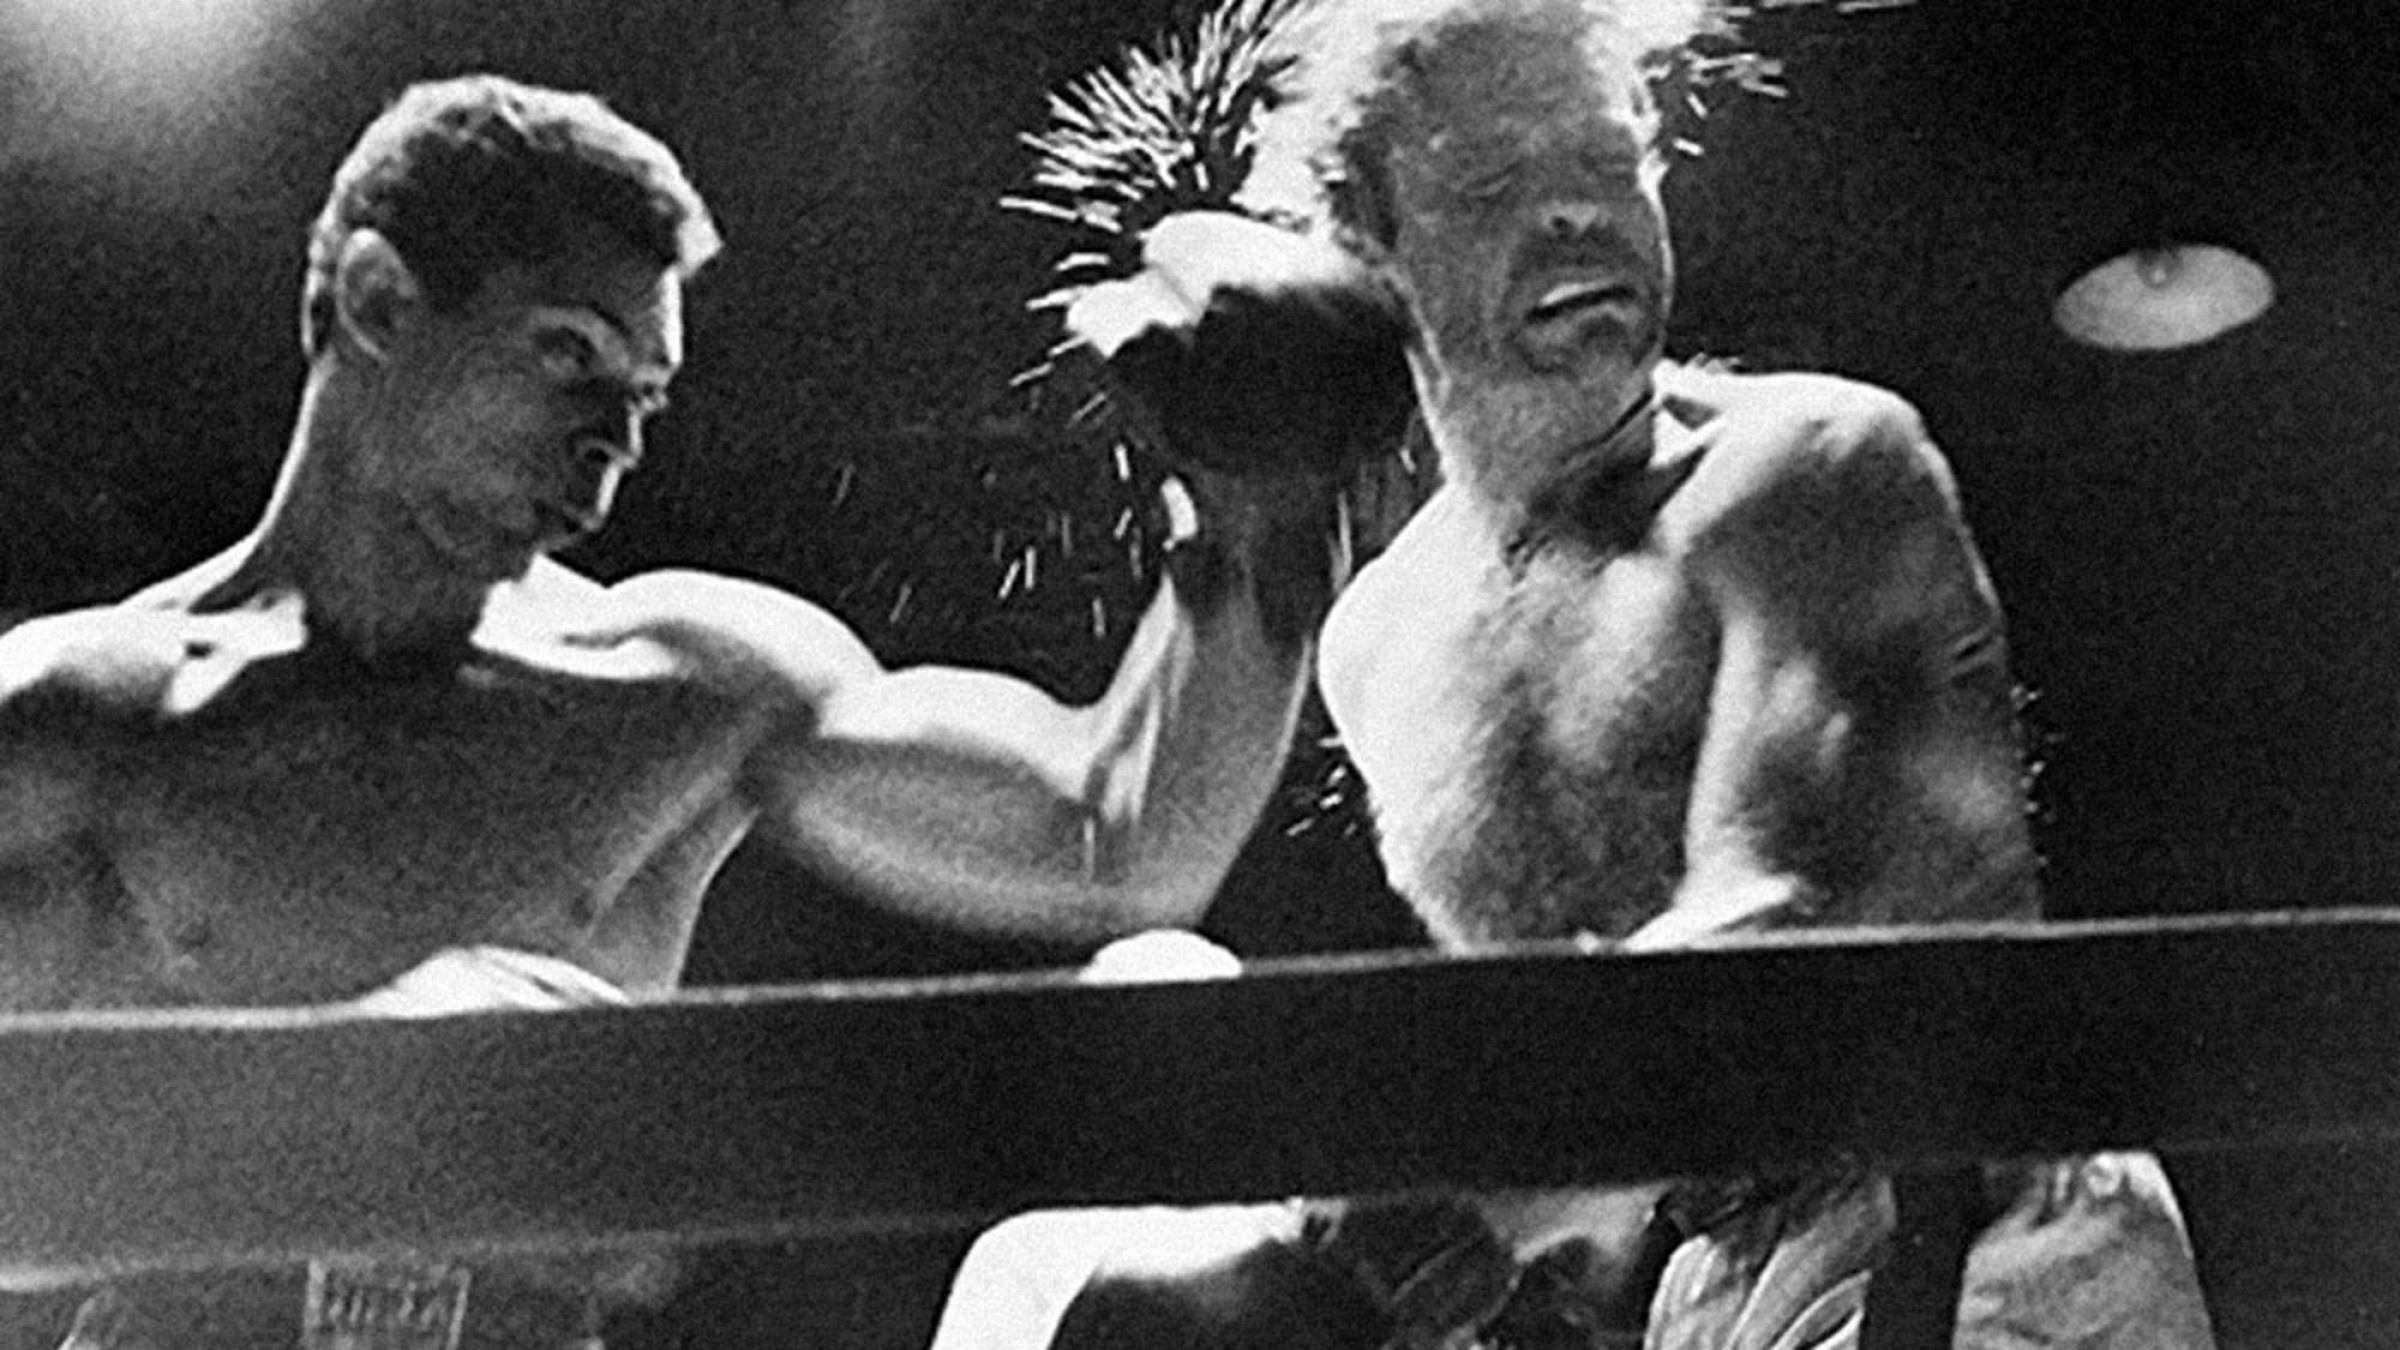 Day of the Fight (1951) Screenshot 4 